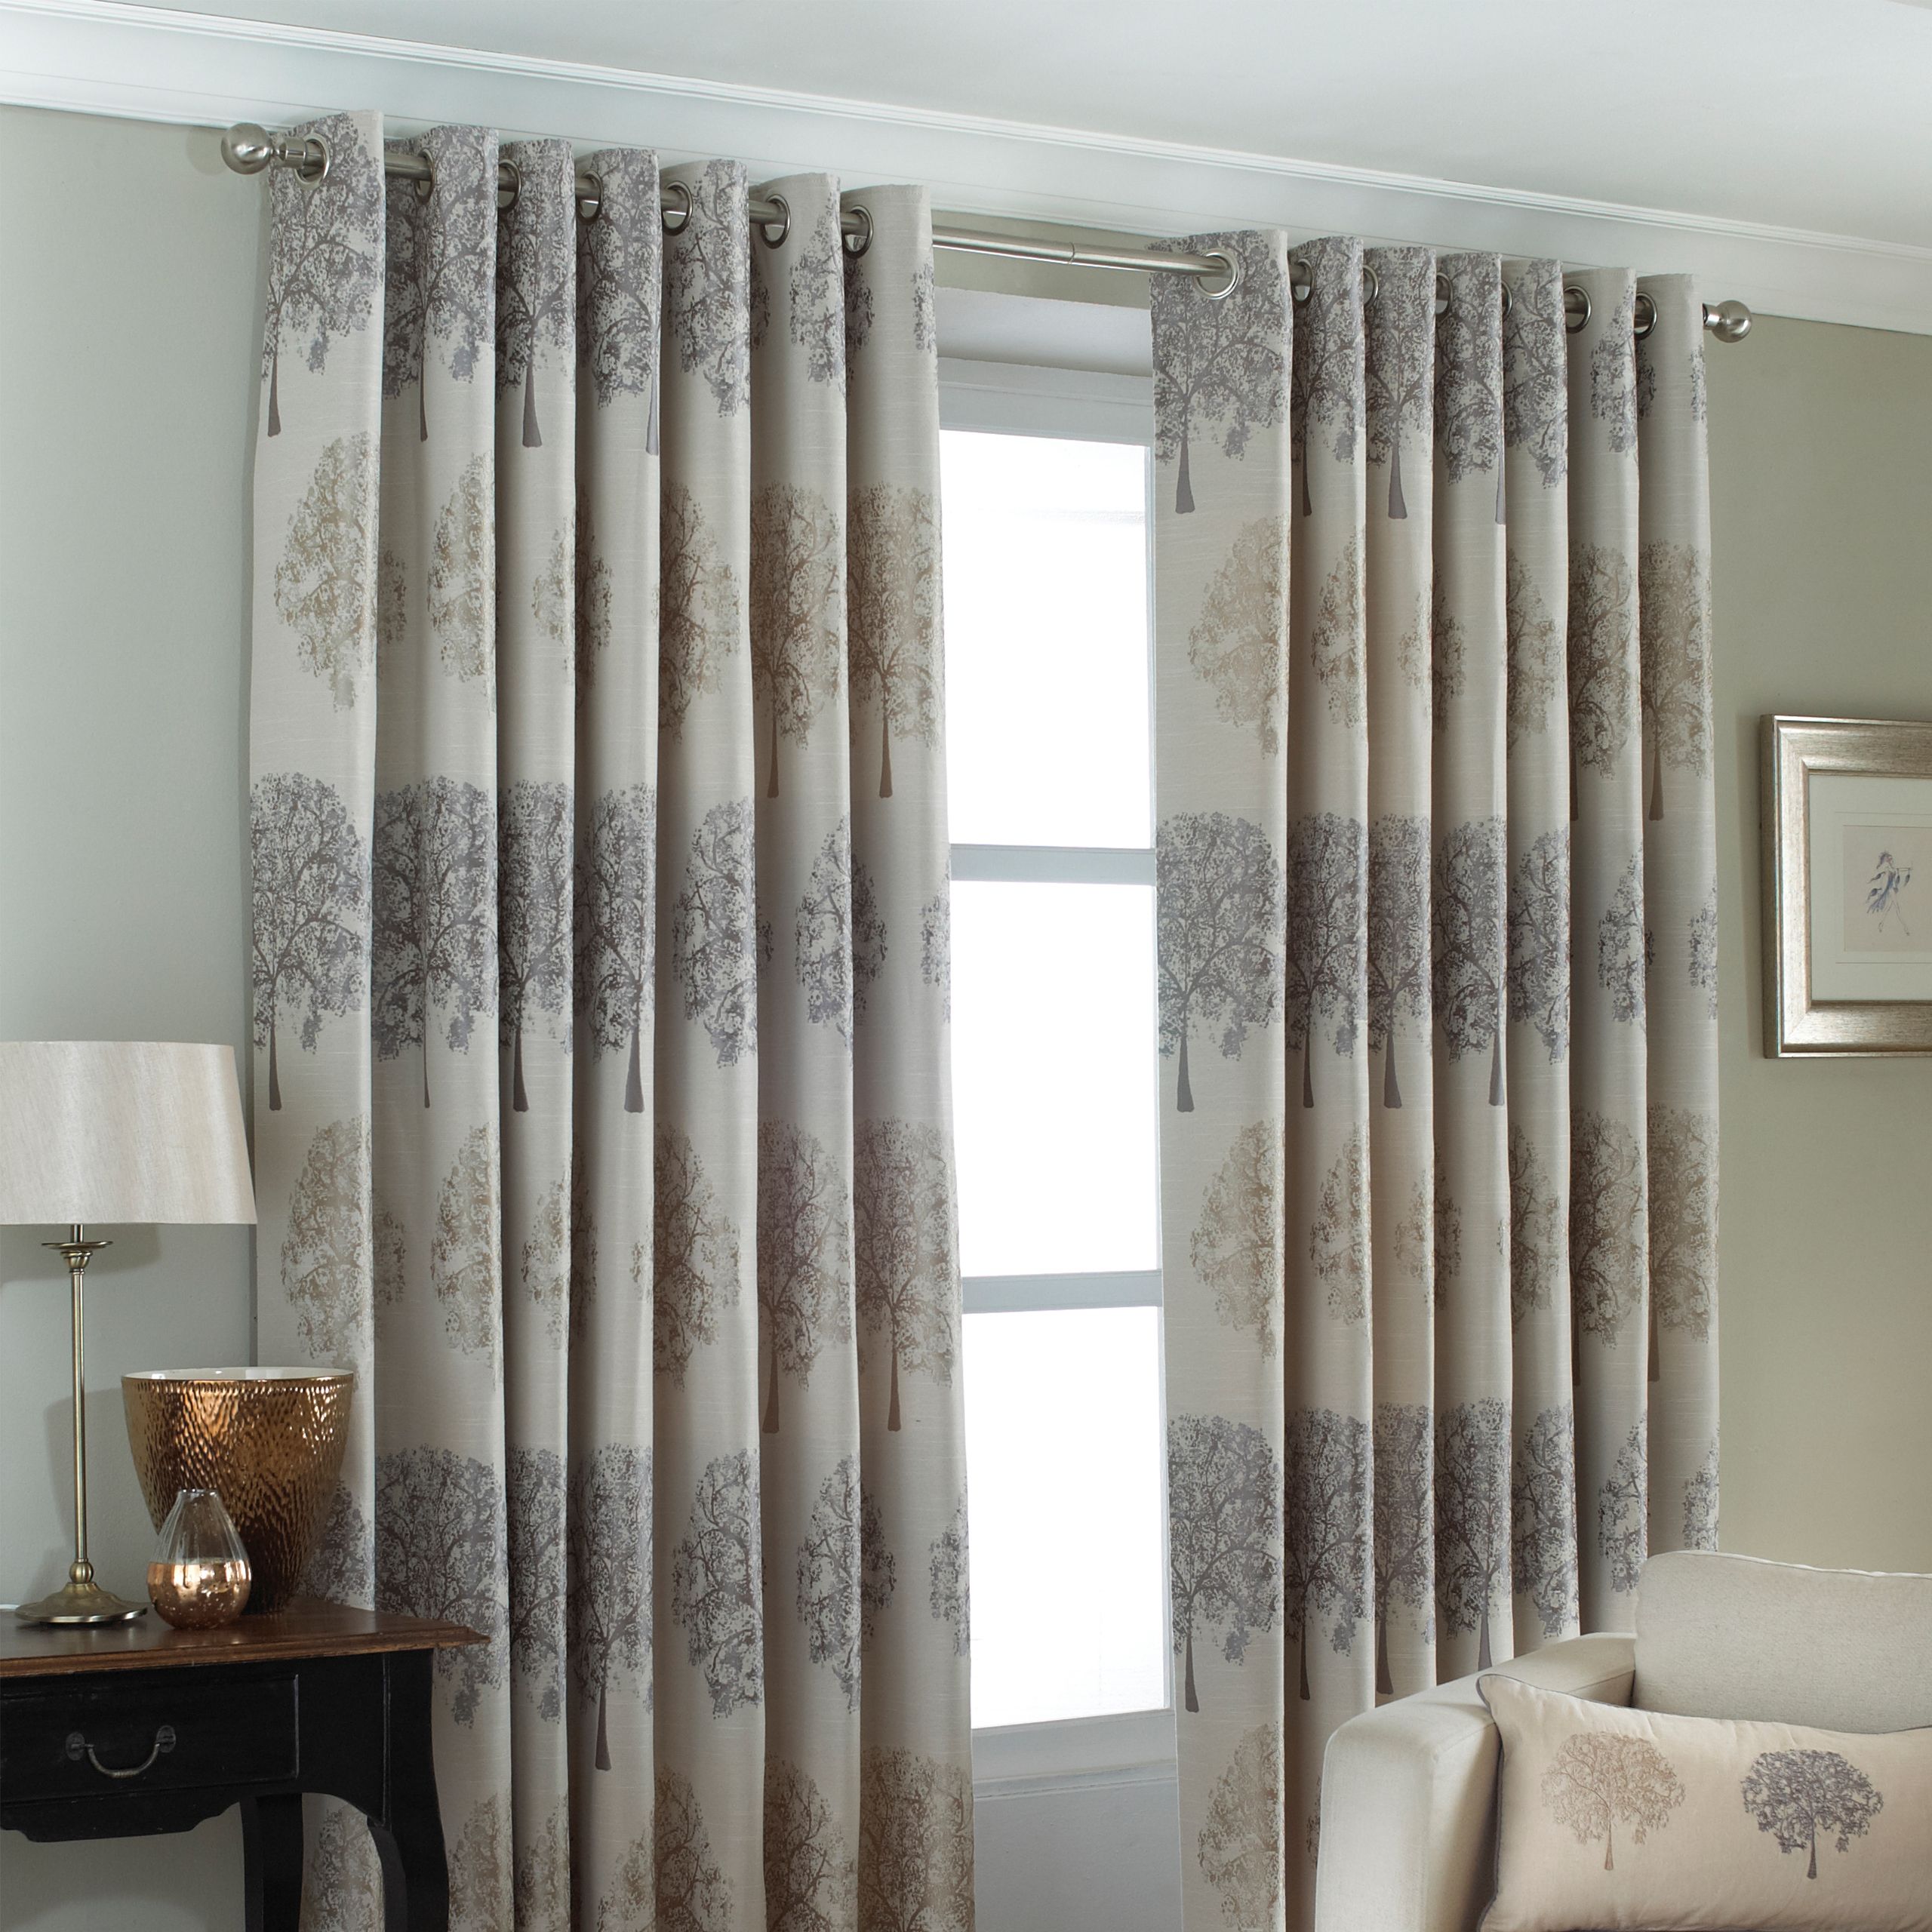 The Oakdale curtains feature a timeless design of oaktree motifs.  Made of 100% robust polyester these curtains don’t stain easily. With stainless steel eyelet holes the Oakdale curtains are easy to hang and only require a curtain pole for installation.